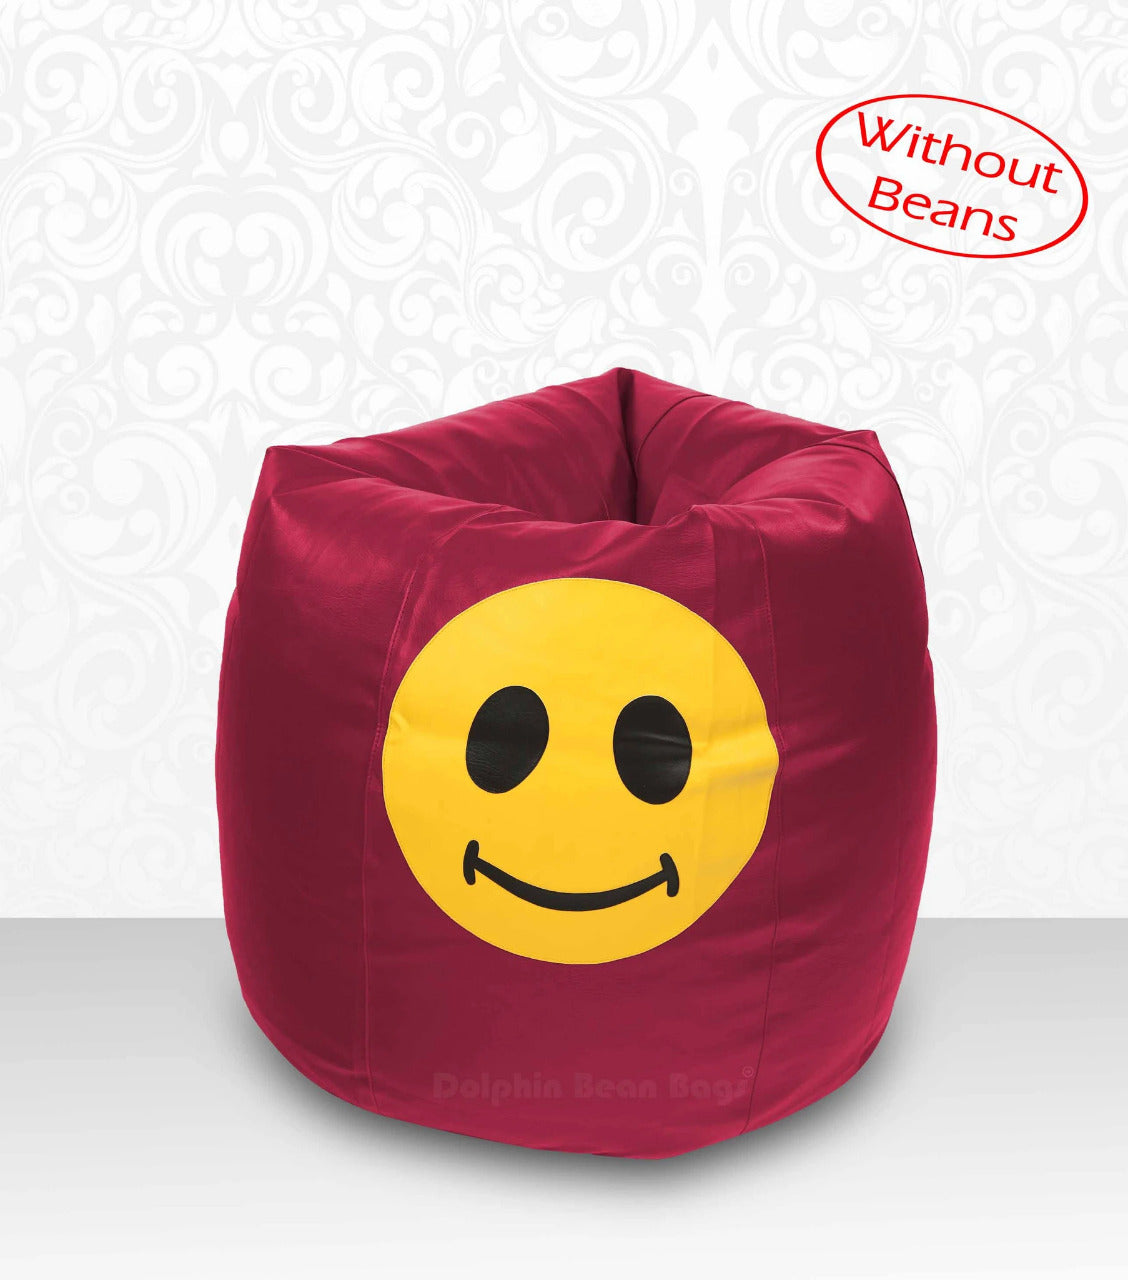 Bean Bag : XL Bean Bag Maroon Smiley Cover (Without Beans)